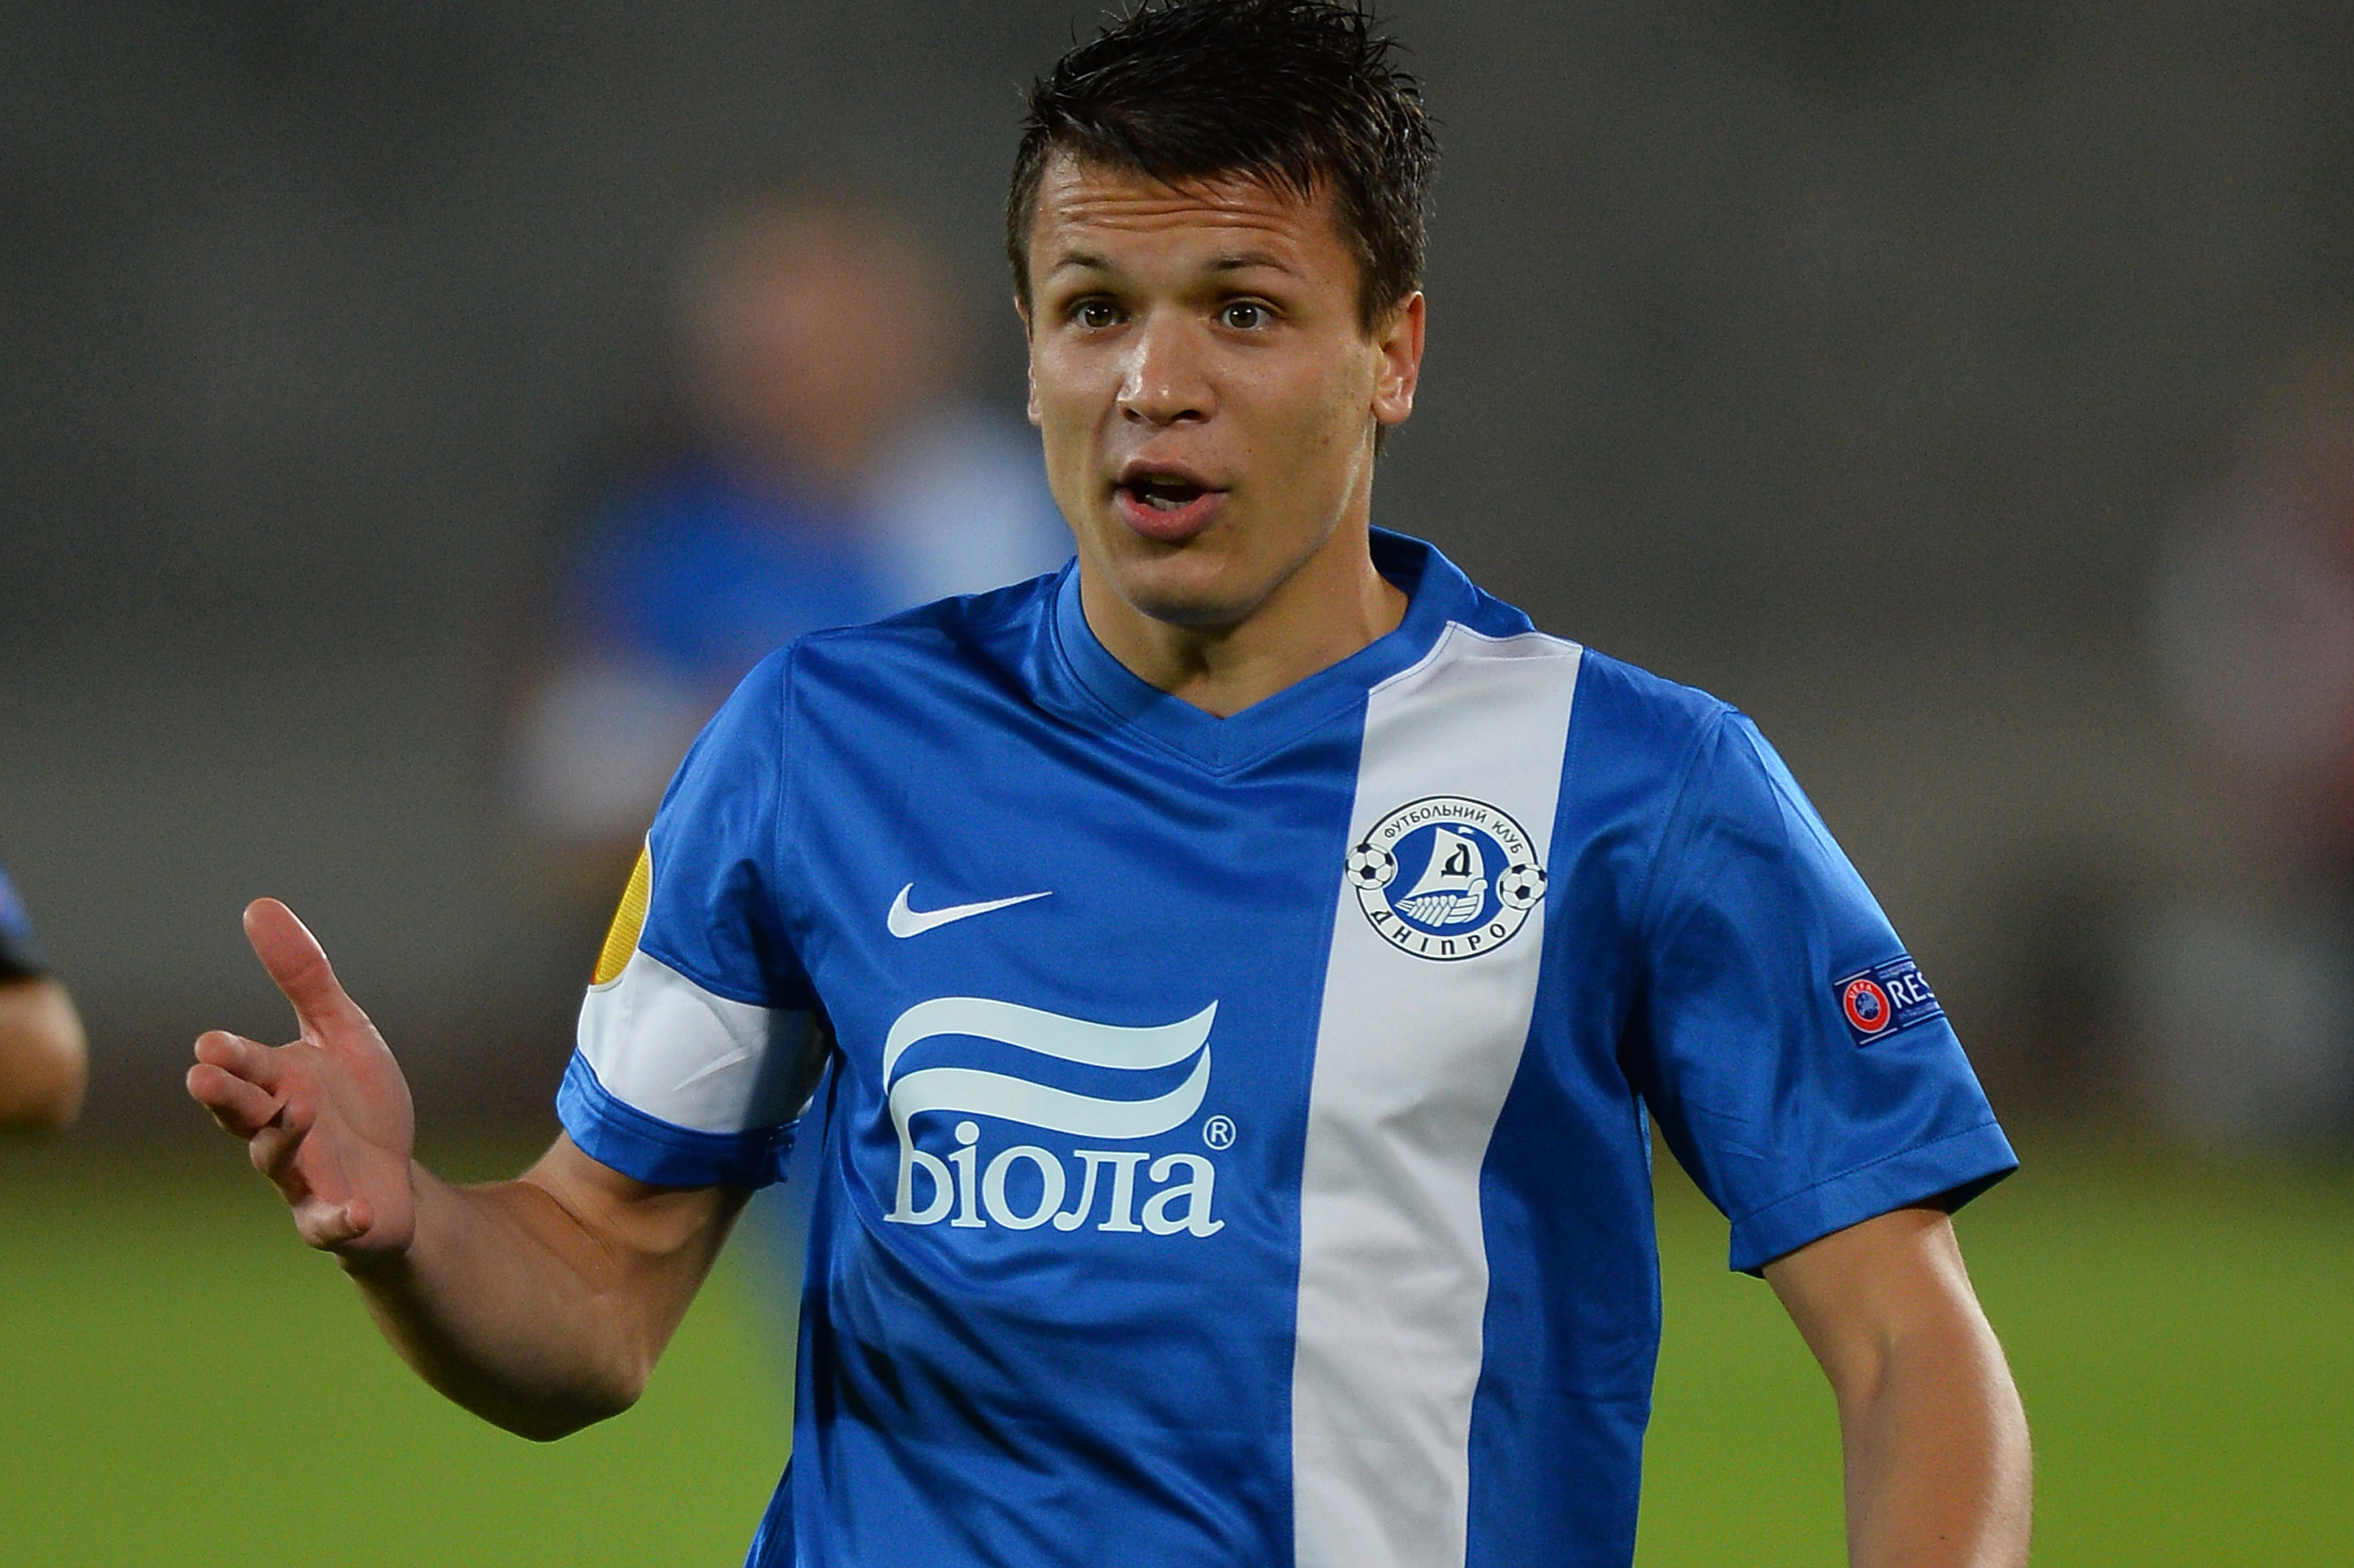 Liverpool target Yevhen Konoplyanka 'cried' after last-minute transfer move collapsed despite agreeing deal.